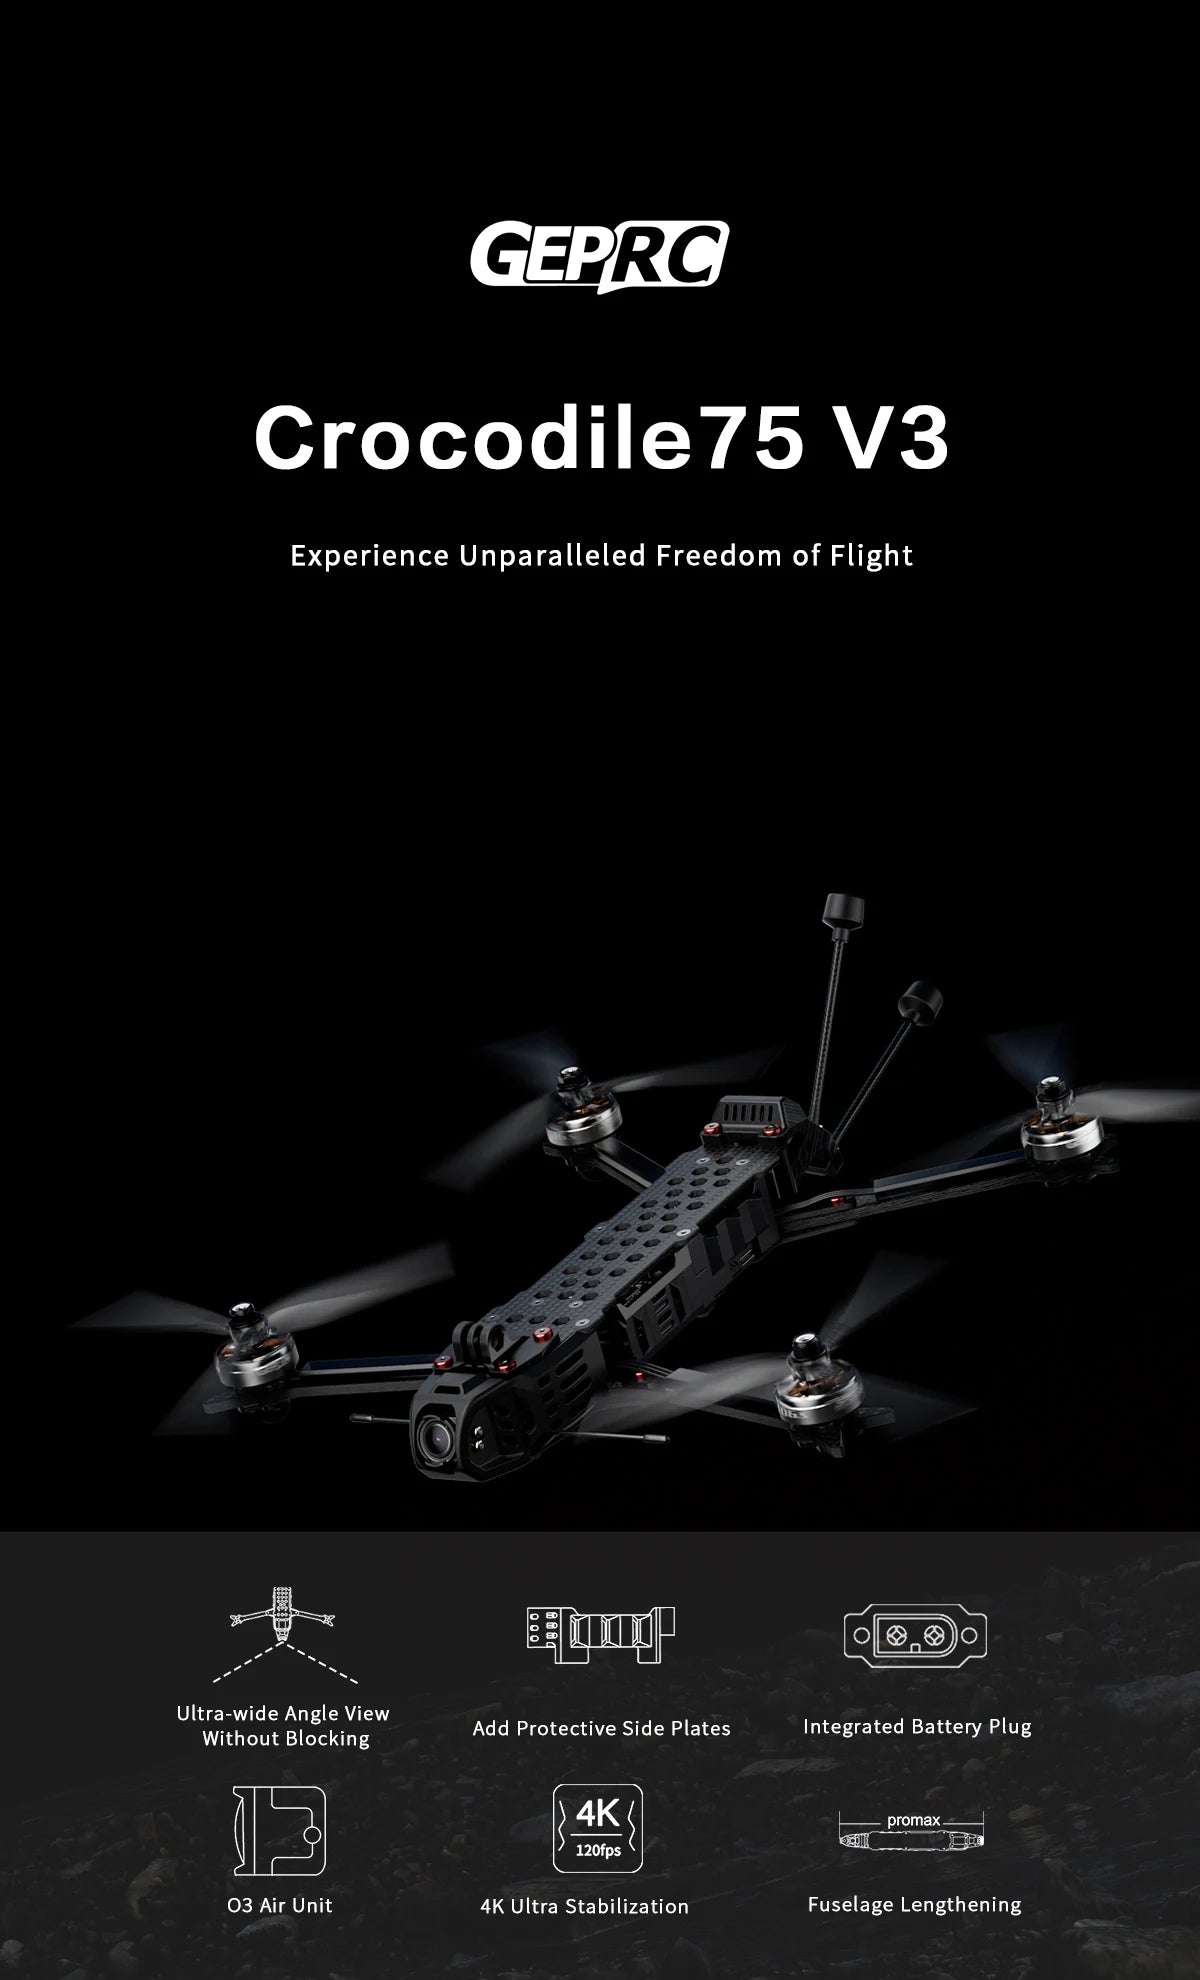 GEPRC 7.5inch Crocodile75 V3 HD, GEPRG Crocodile75 V3 Experience Unparalleled Freedom of Flight Ultra